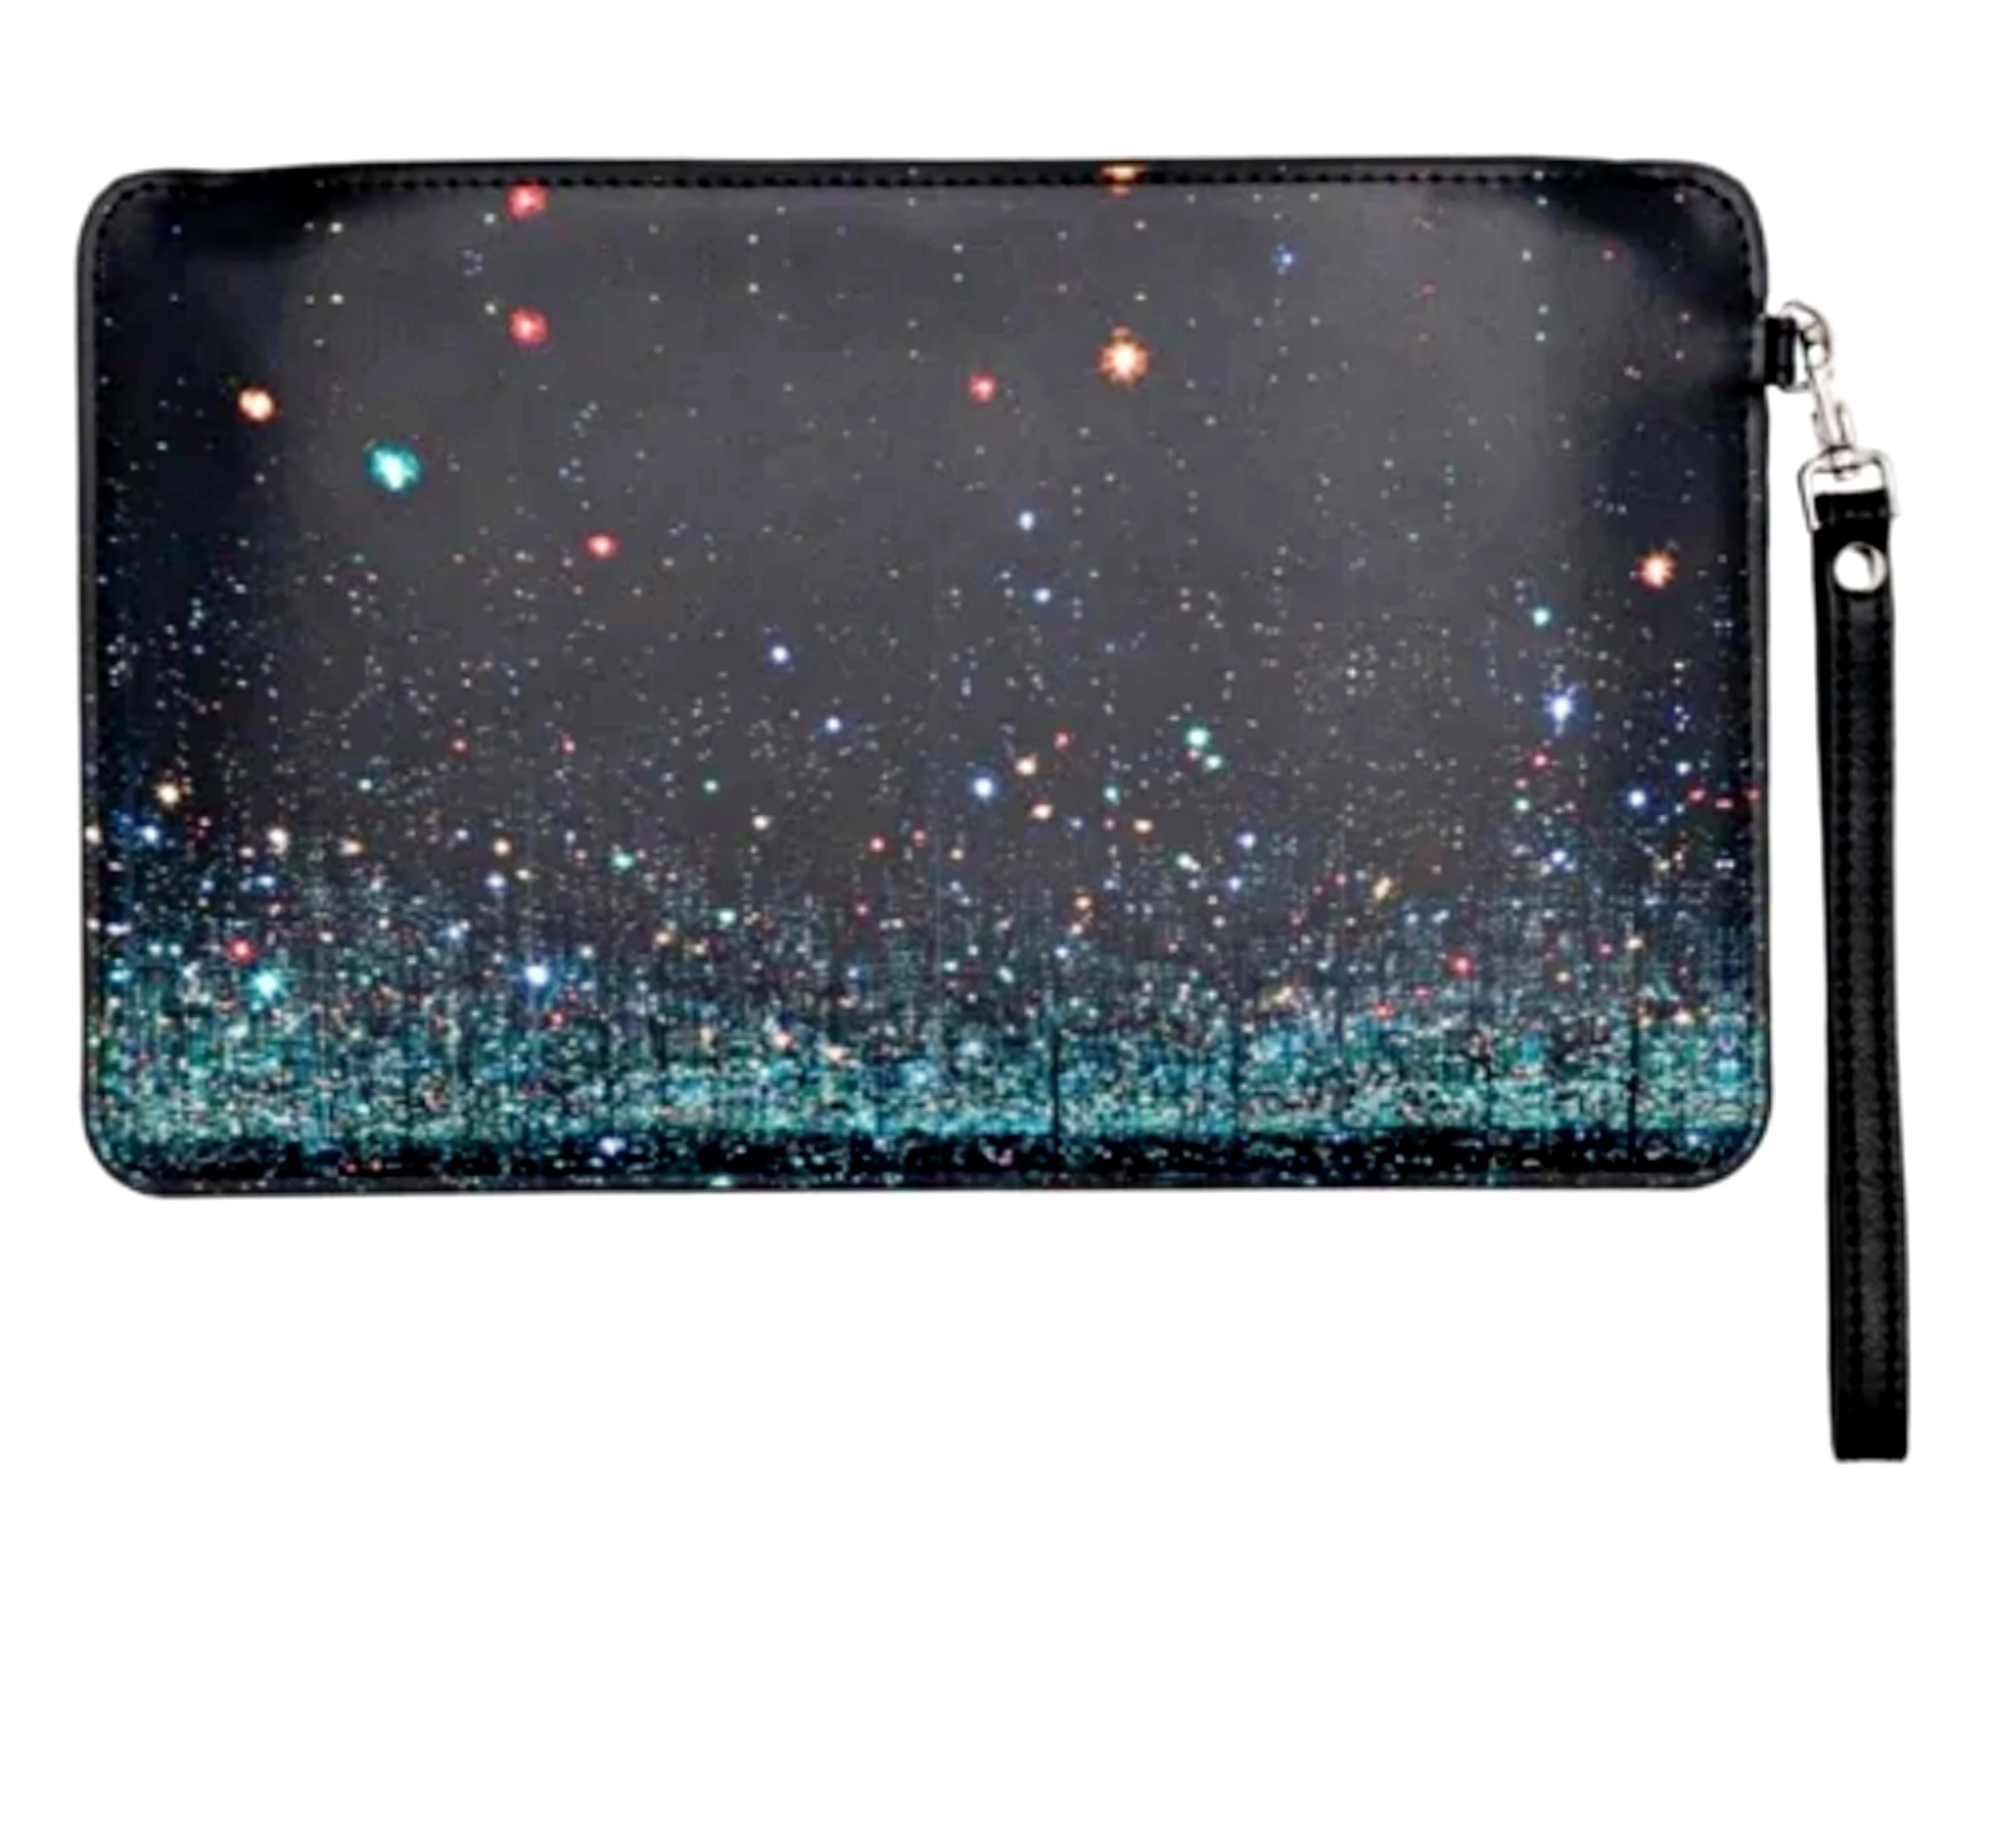 Limited Edition leather clutch (bag) depicting the famed Infinity Mirrored Room